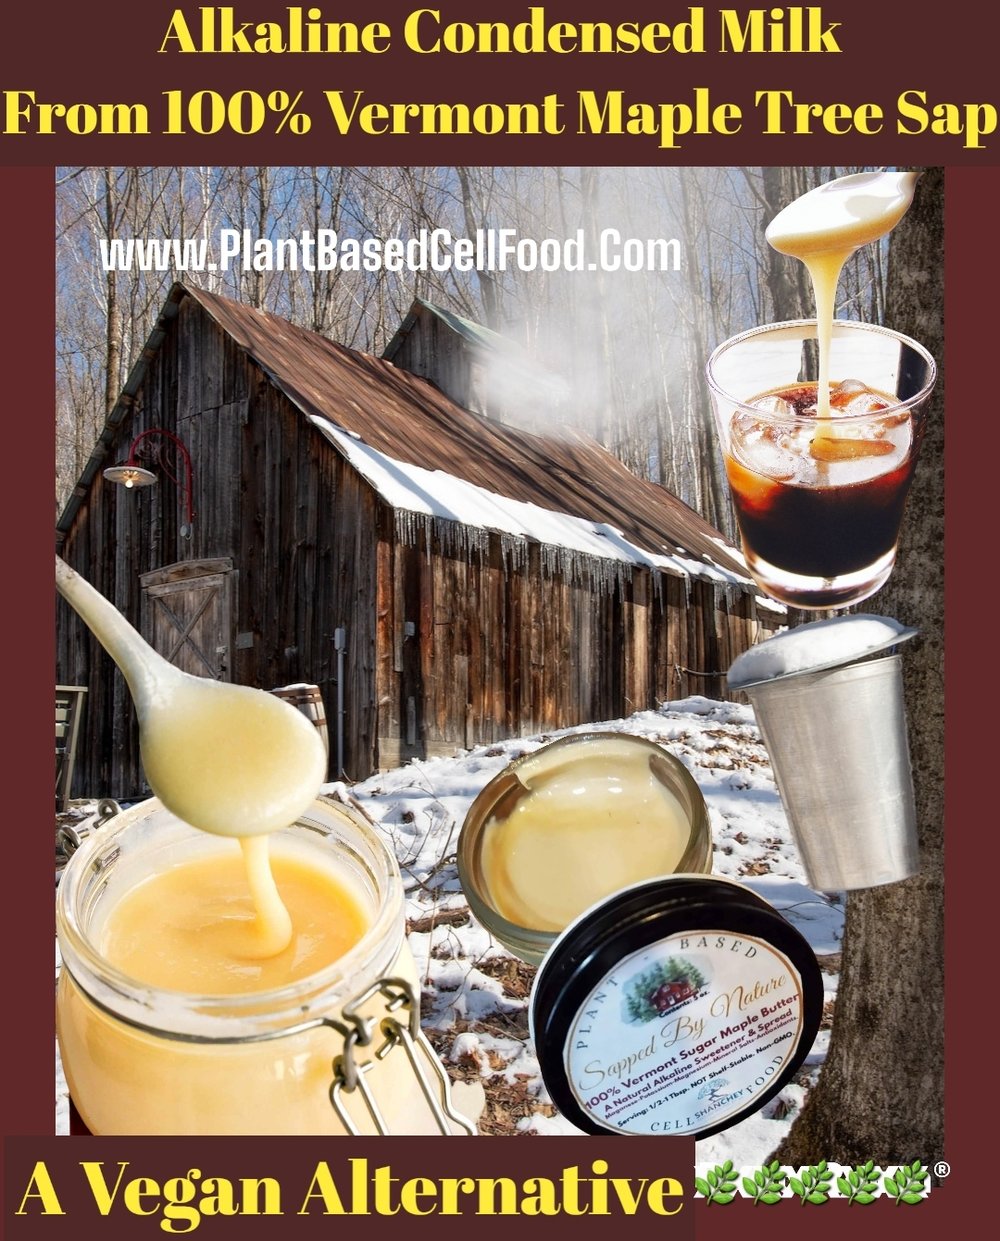 SAPPED BY NATURE Vermont Maple Sugar/Minnesota Maple Cream. Anxiety-Probiotic-Prostate-Anemia-Detox